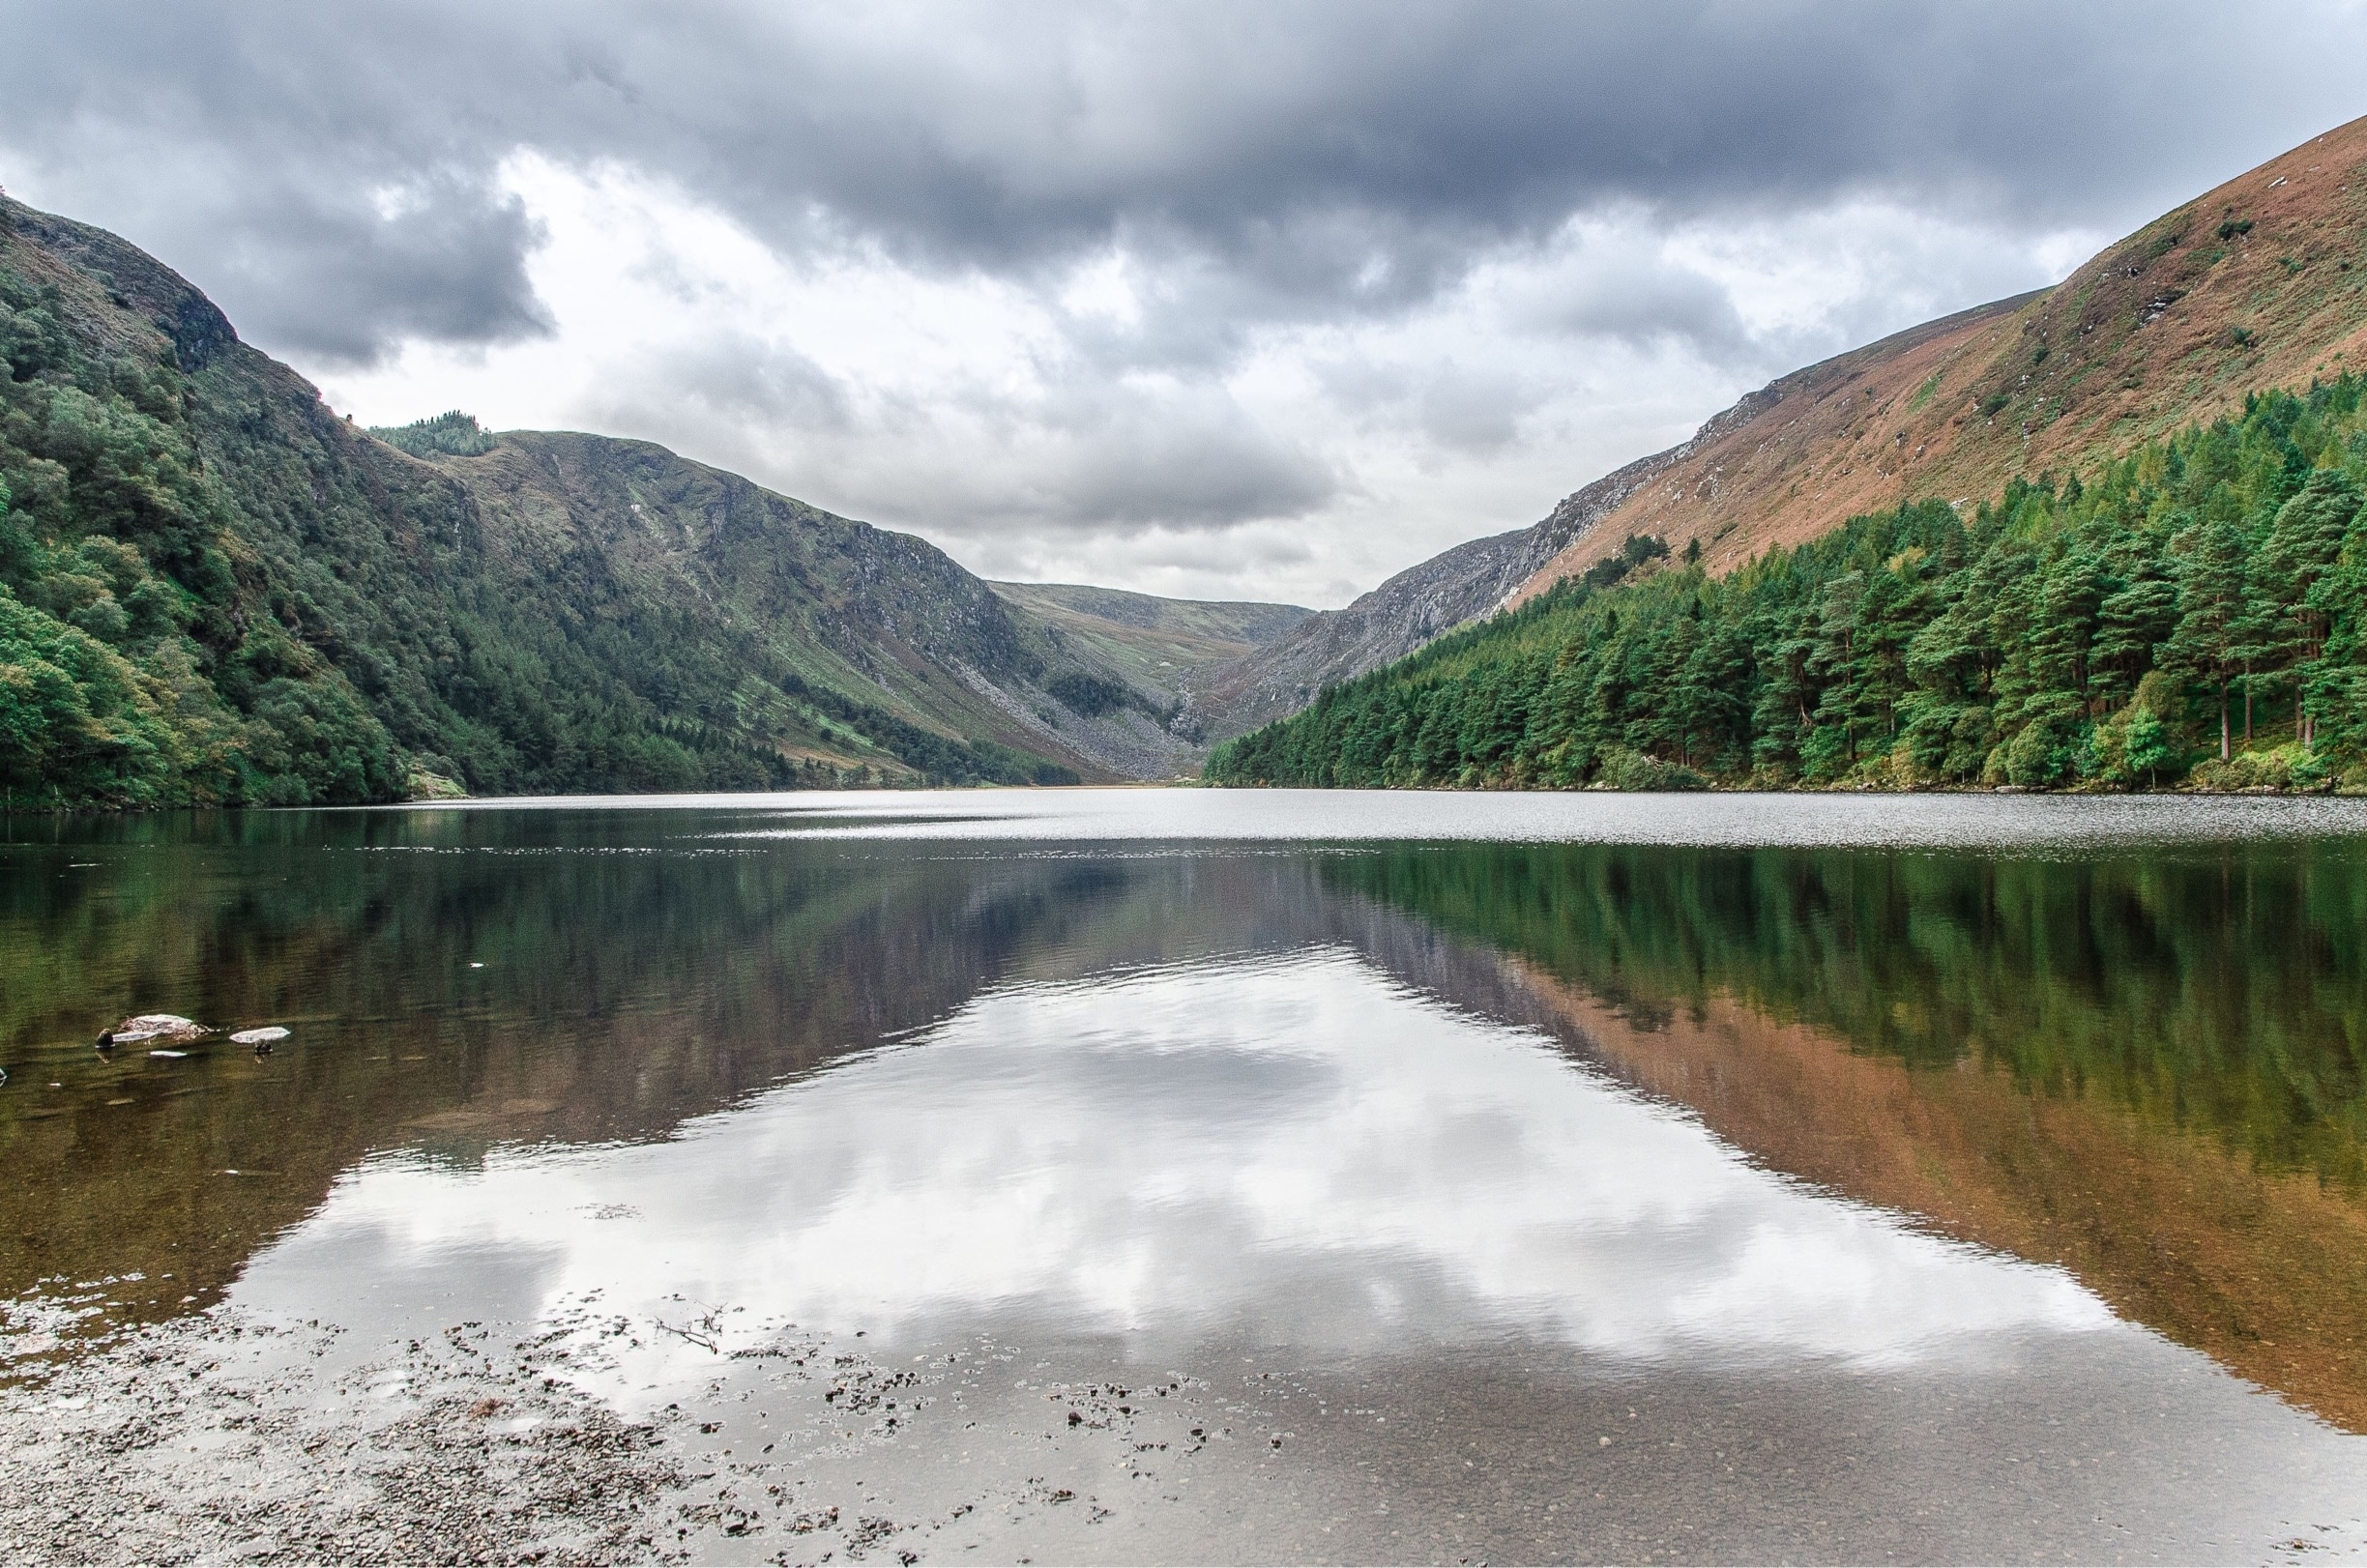 Awesome hike at Glendalough. First experience of Ireland's countryside